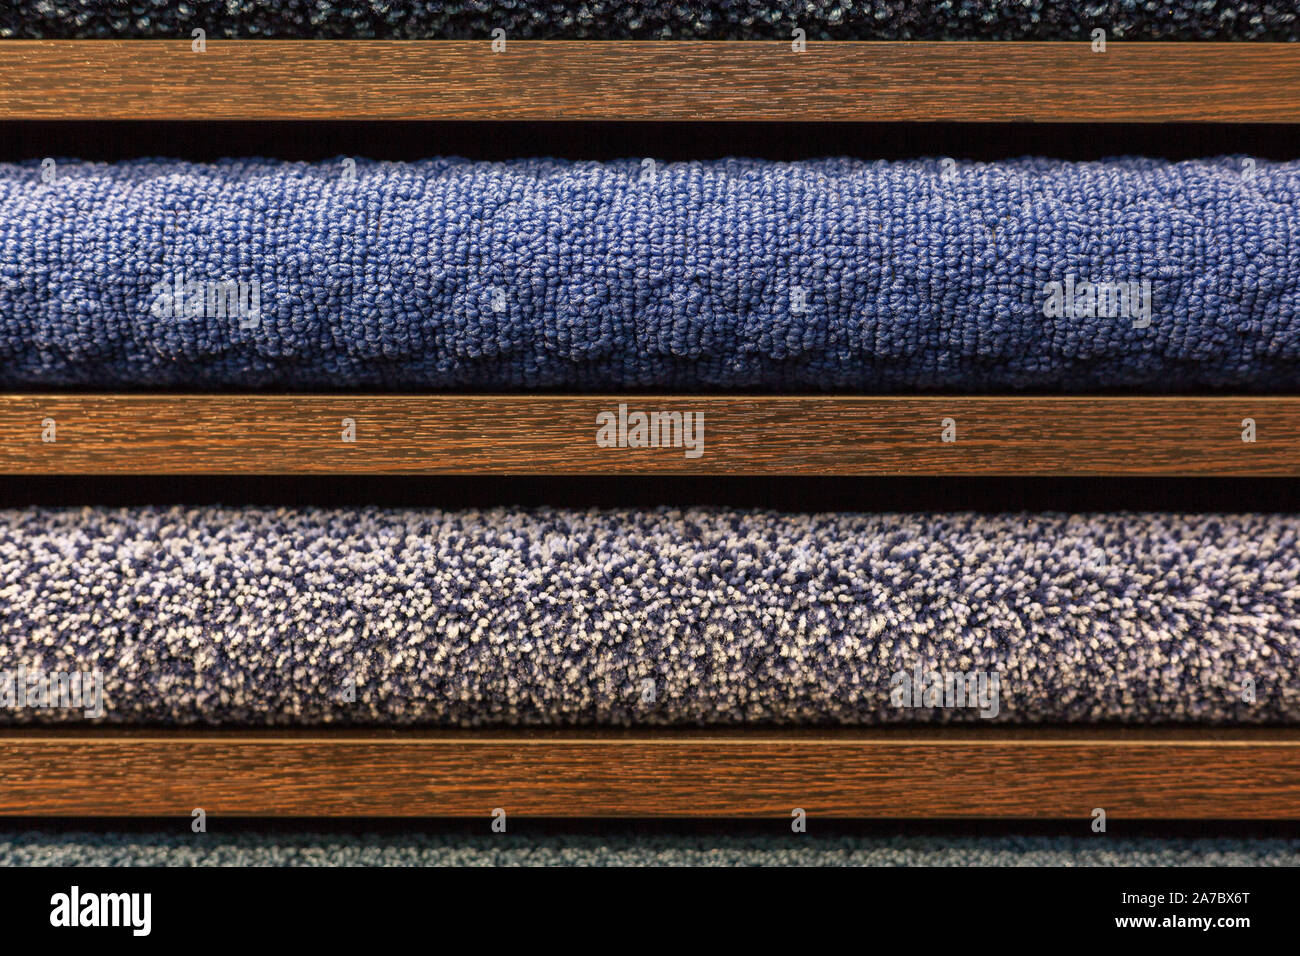 samples of multi-colored carpets on the shelves Stock Photo